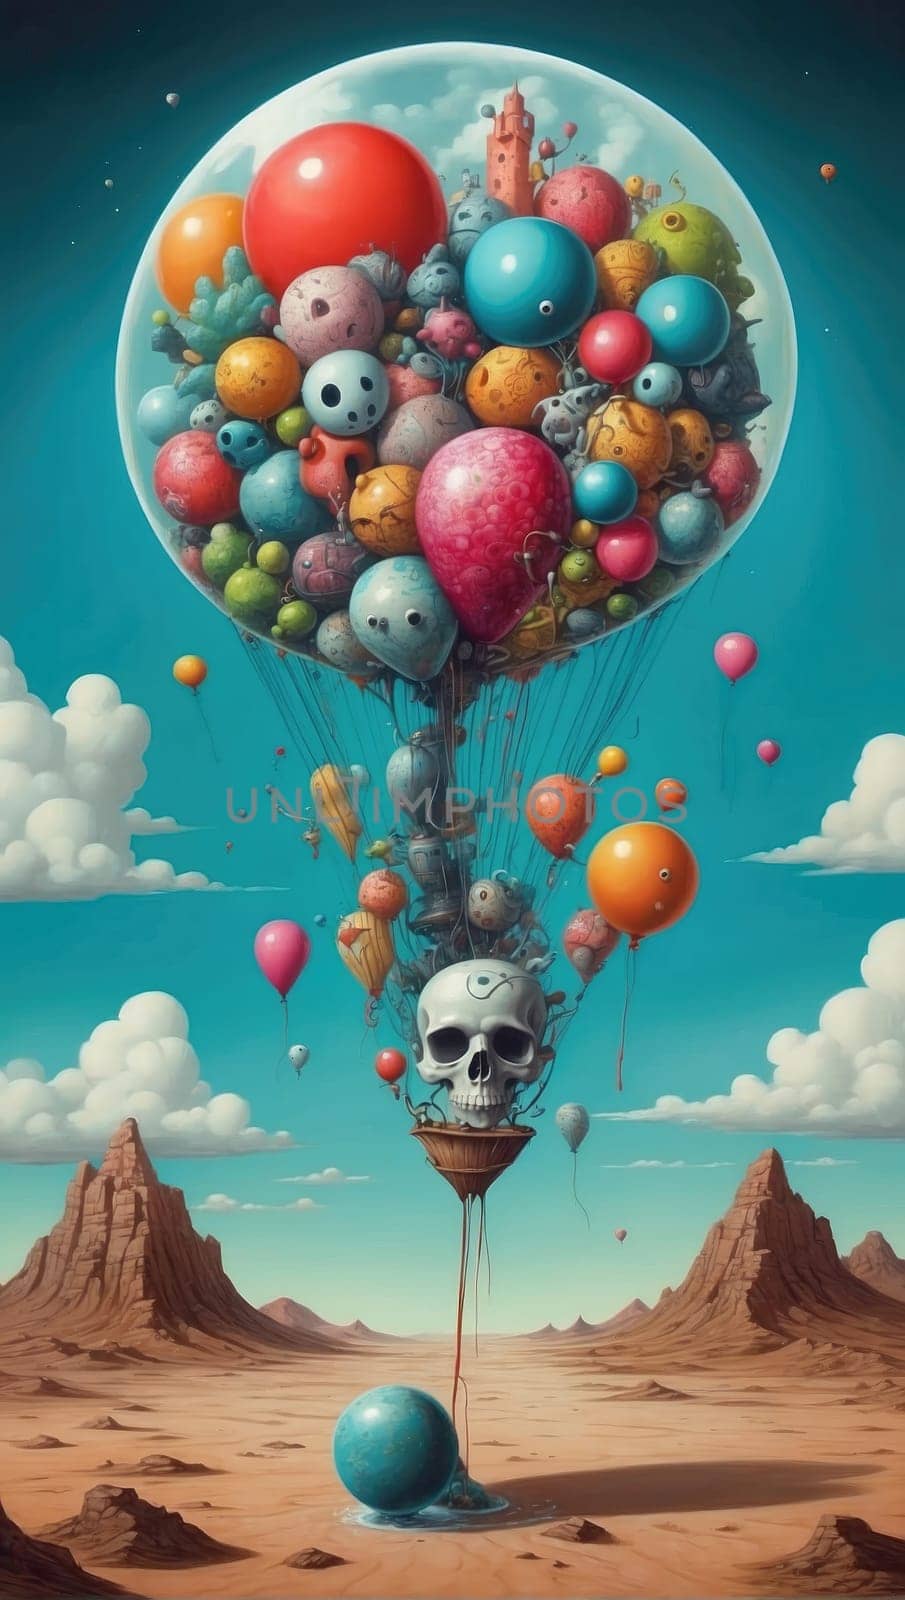 Surreal image with balloons by applesstock